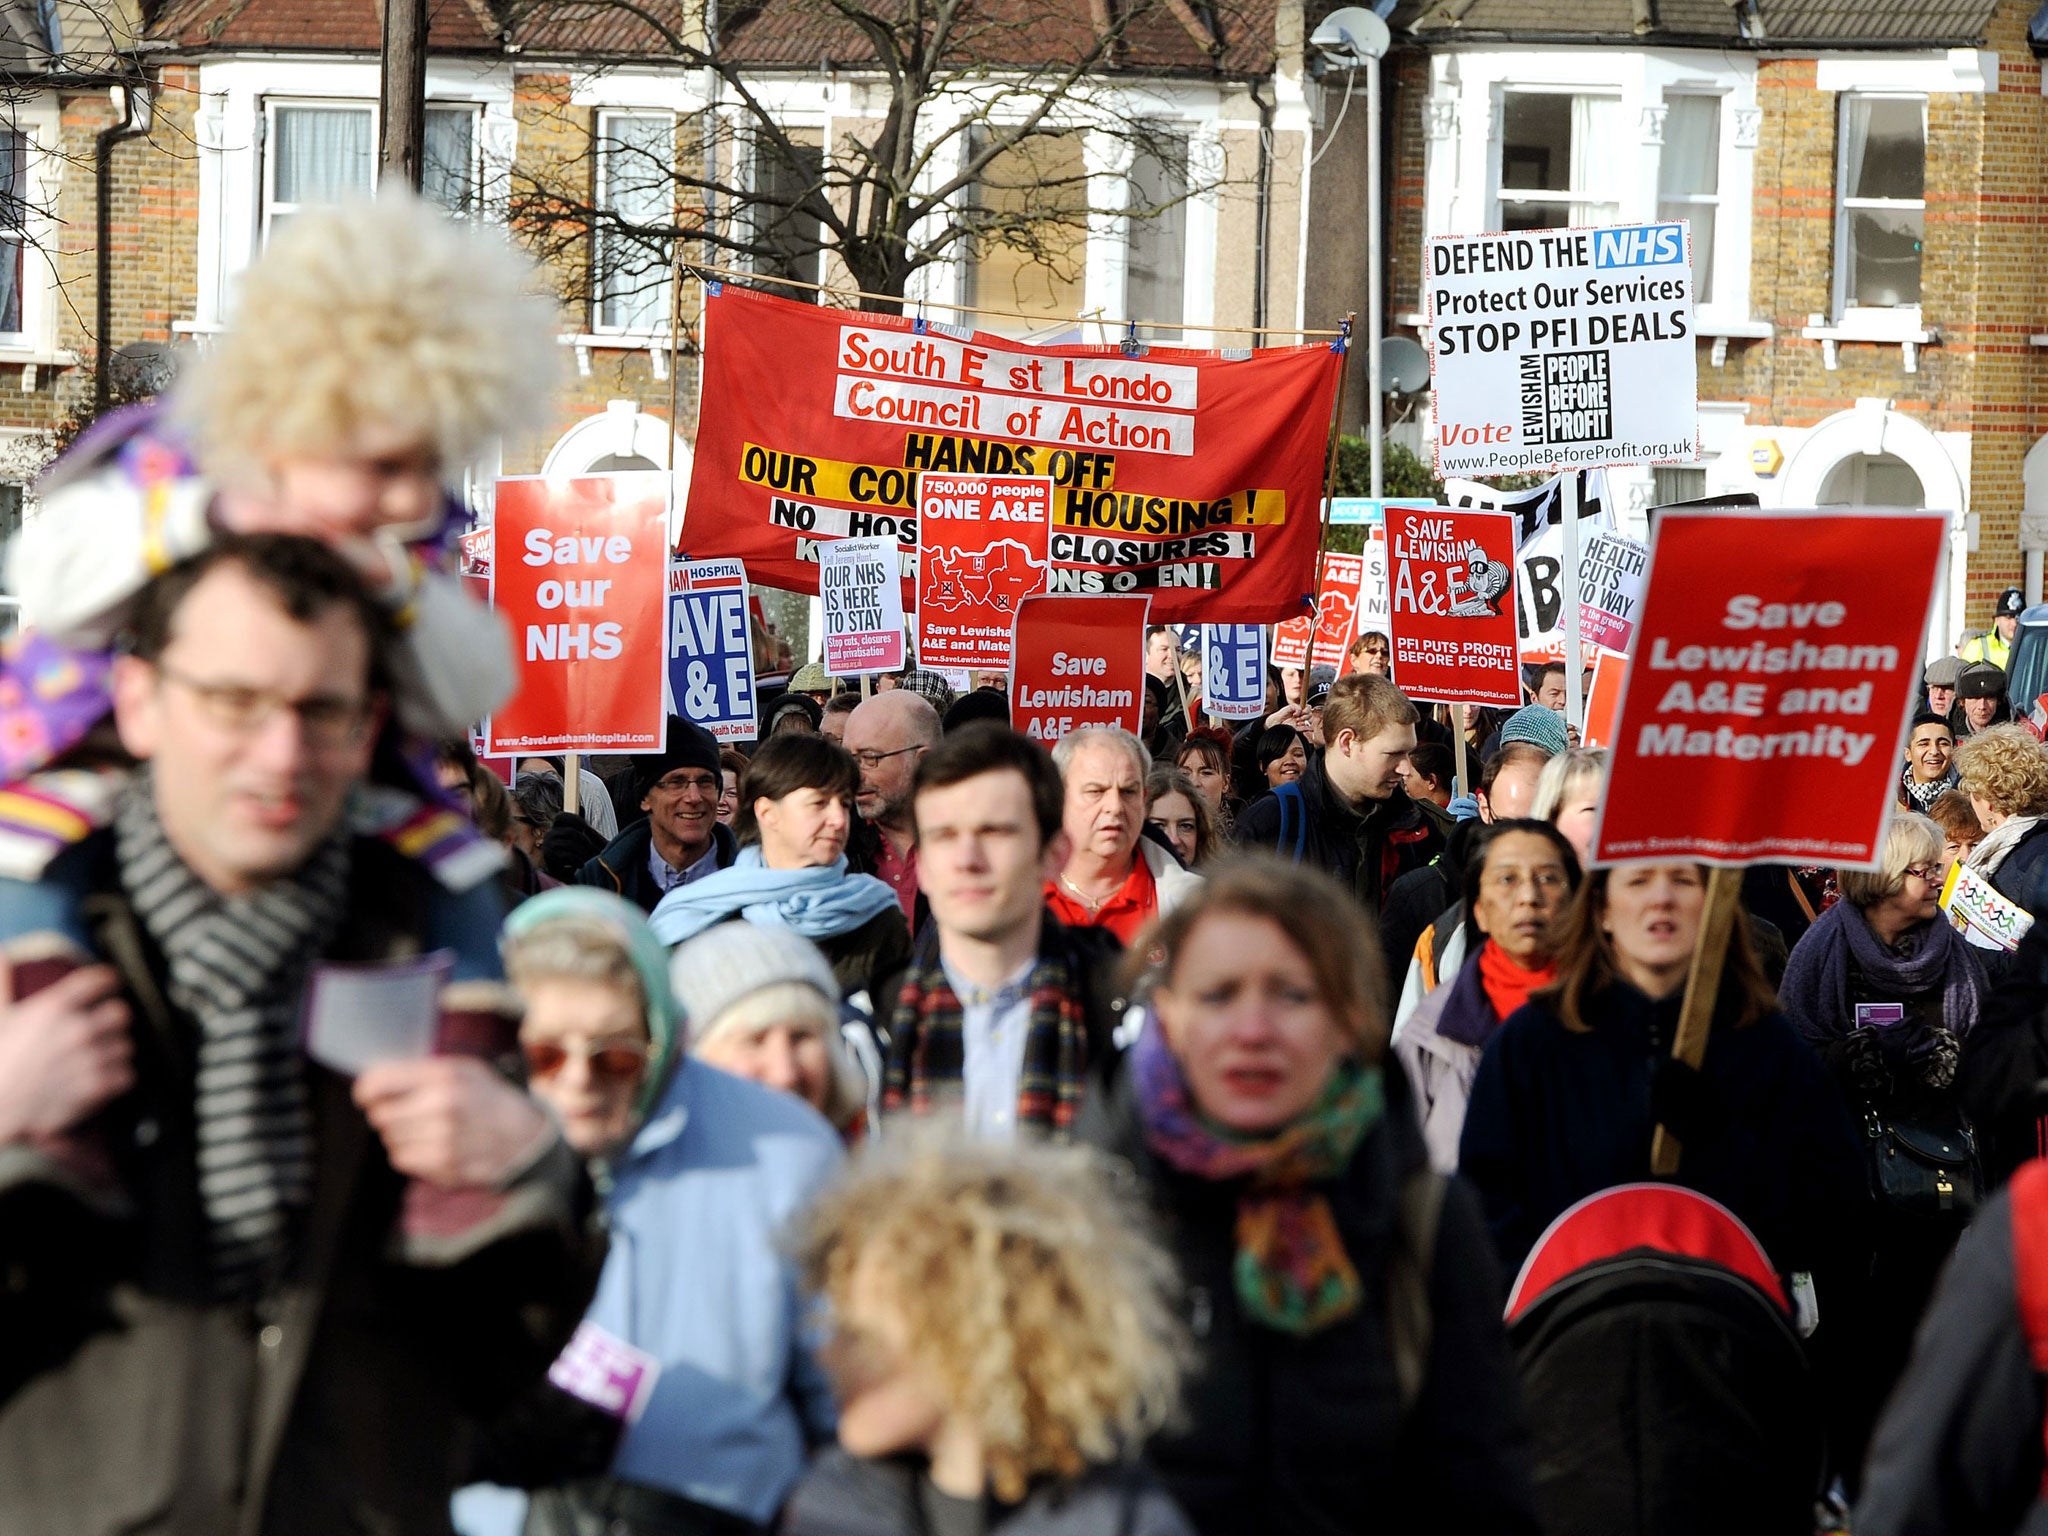 Protesters taking part in a demonstration against the closure of their local A&E and maternity services at Lewisham Hospital in south-east London